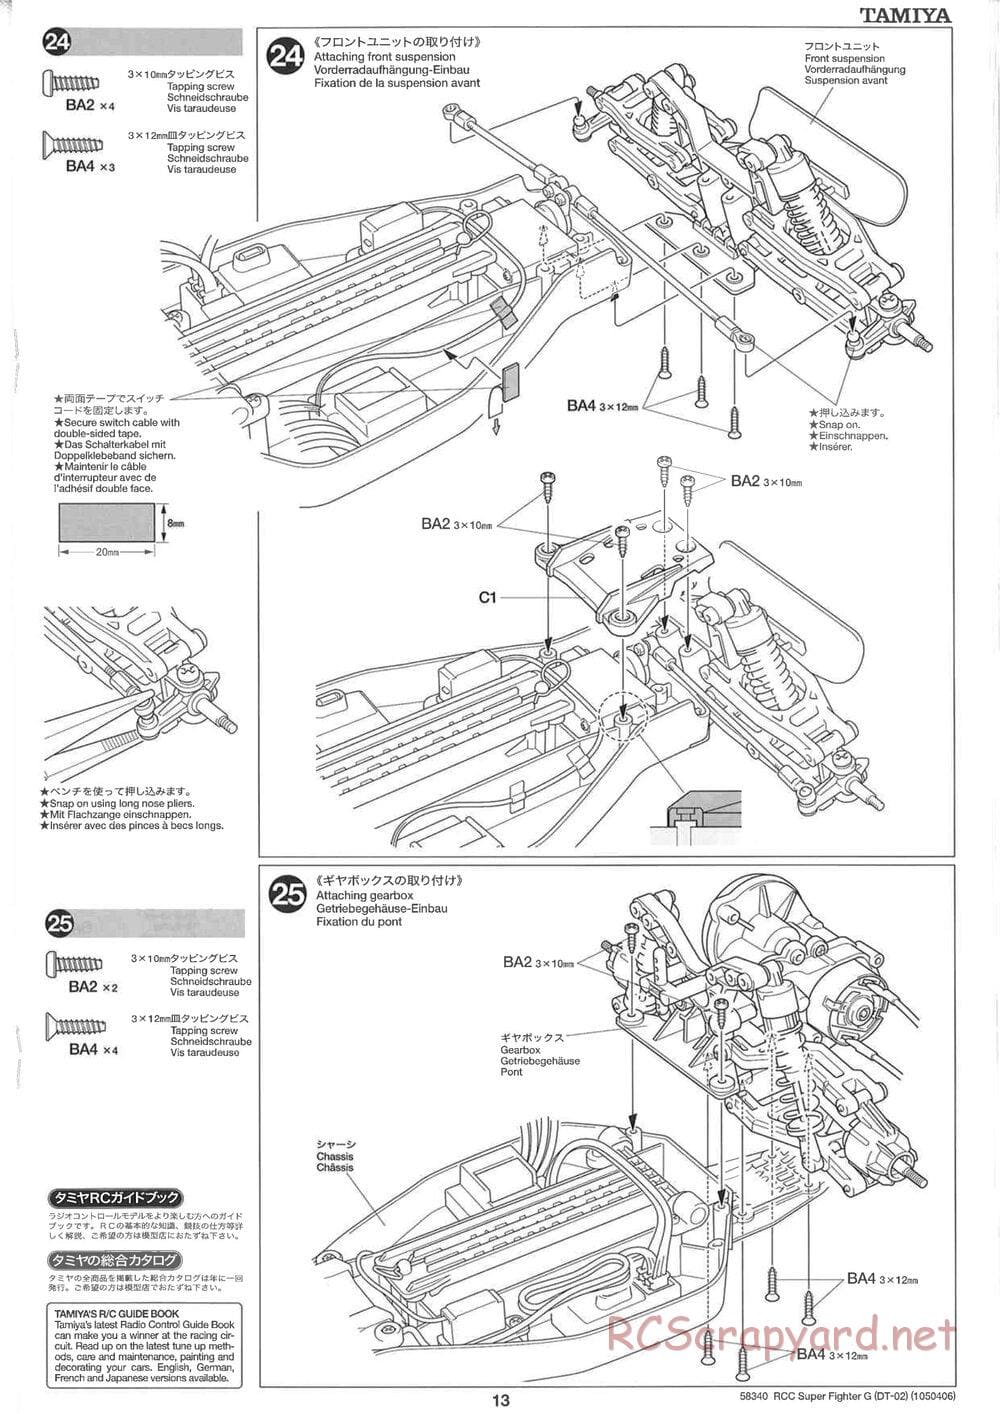 Tamiya - Super Fighter G Chassis - Manual - Page 13